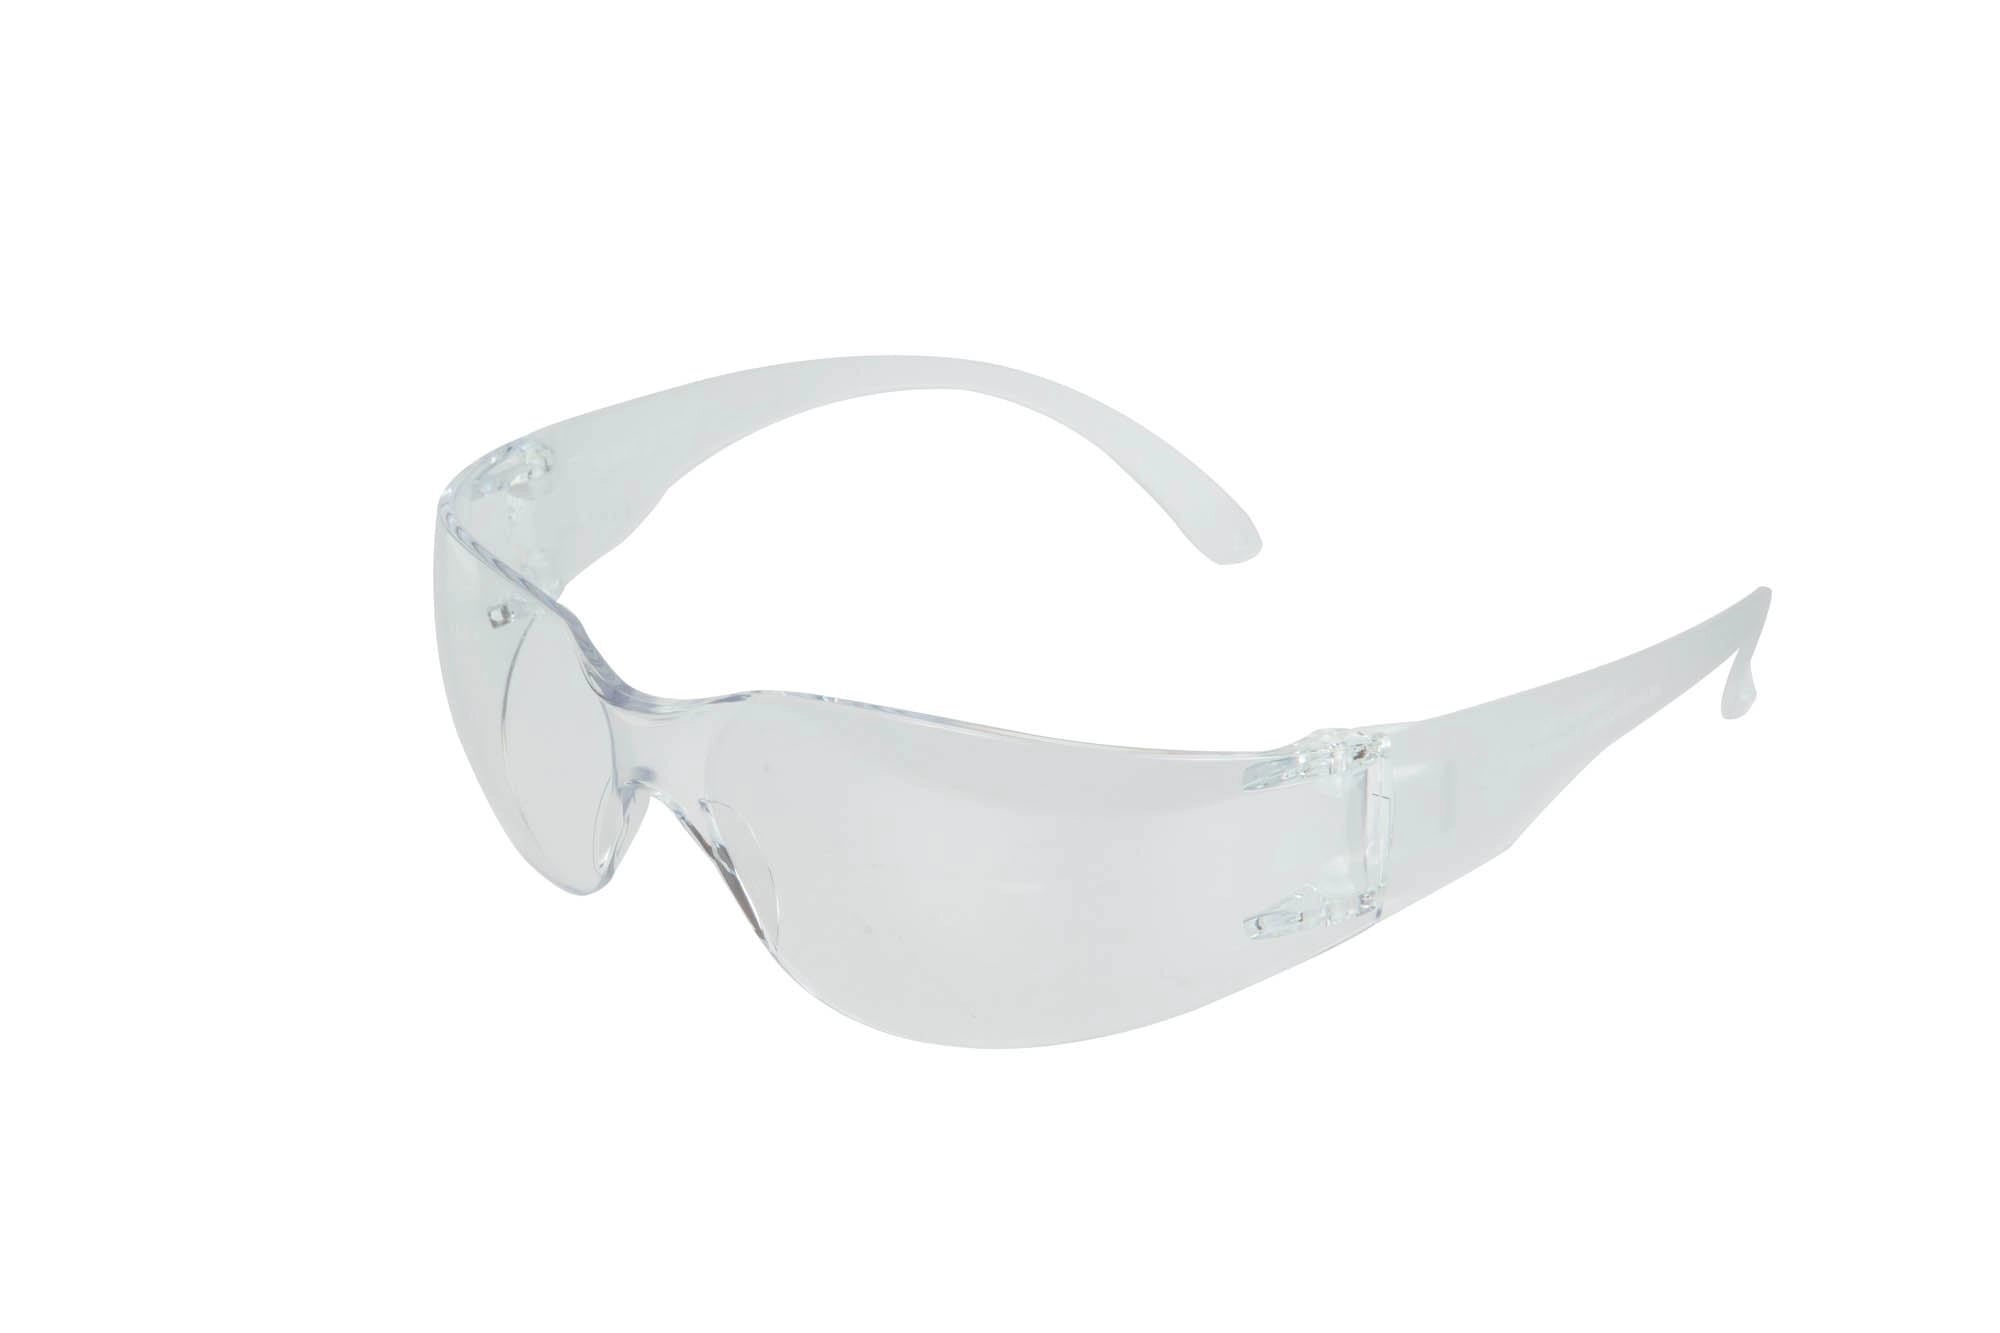 Bolle Safety Glassess BL31 - Clean-1